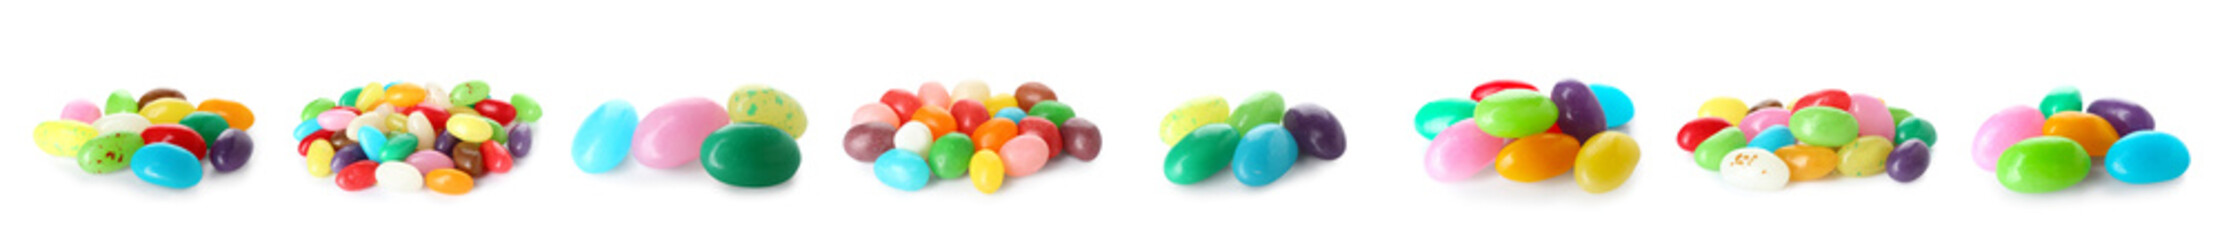 Set of colorful jelly beans on white background